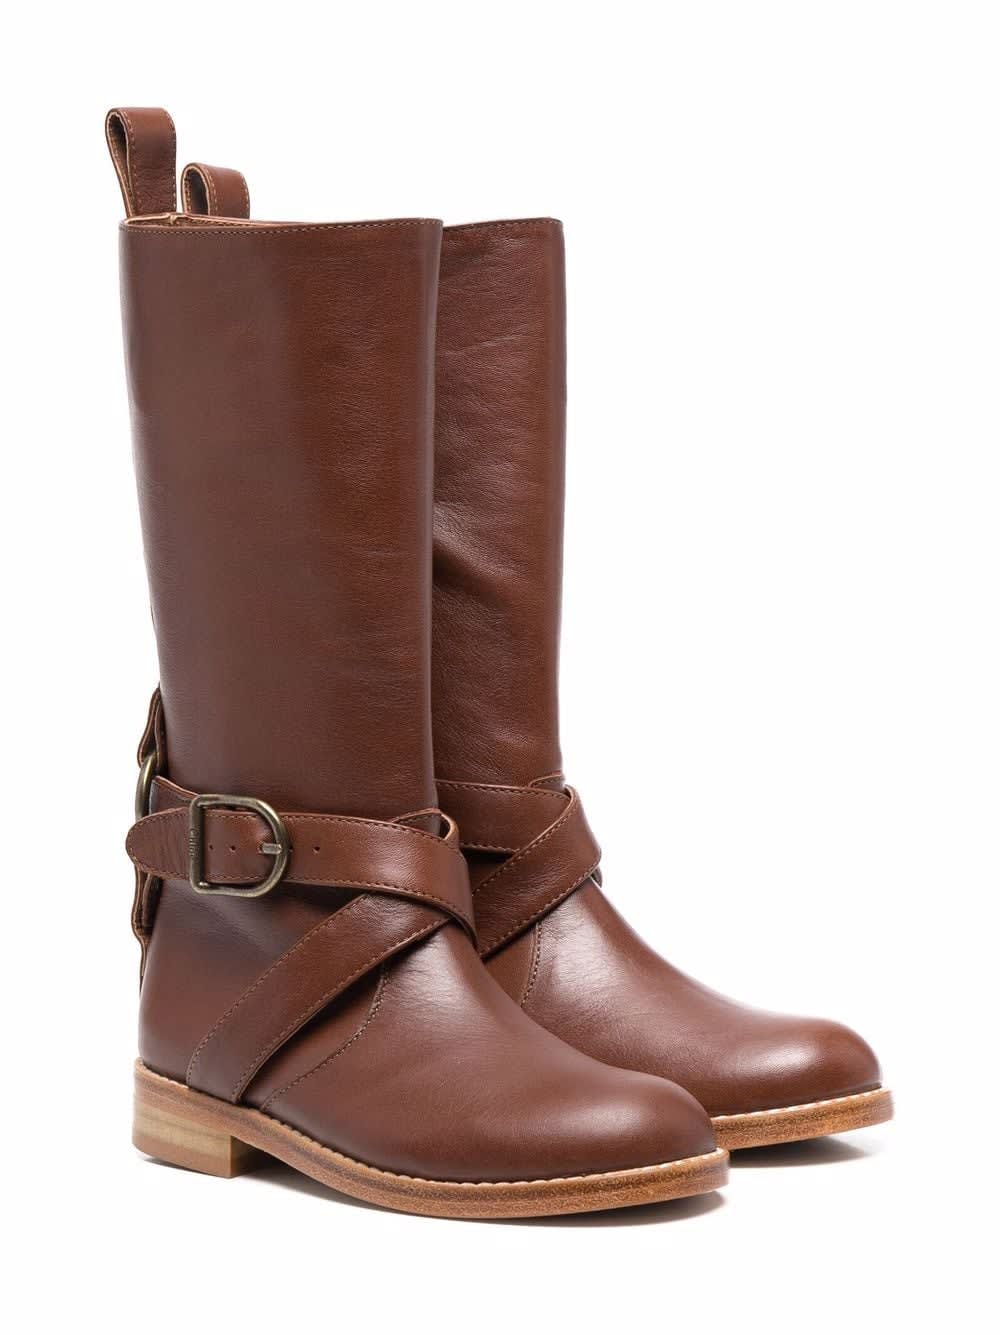 Chloé Kids Brown Leather Boots With Buckle